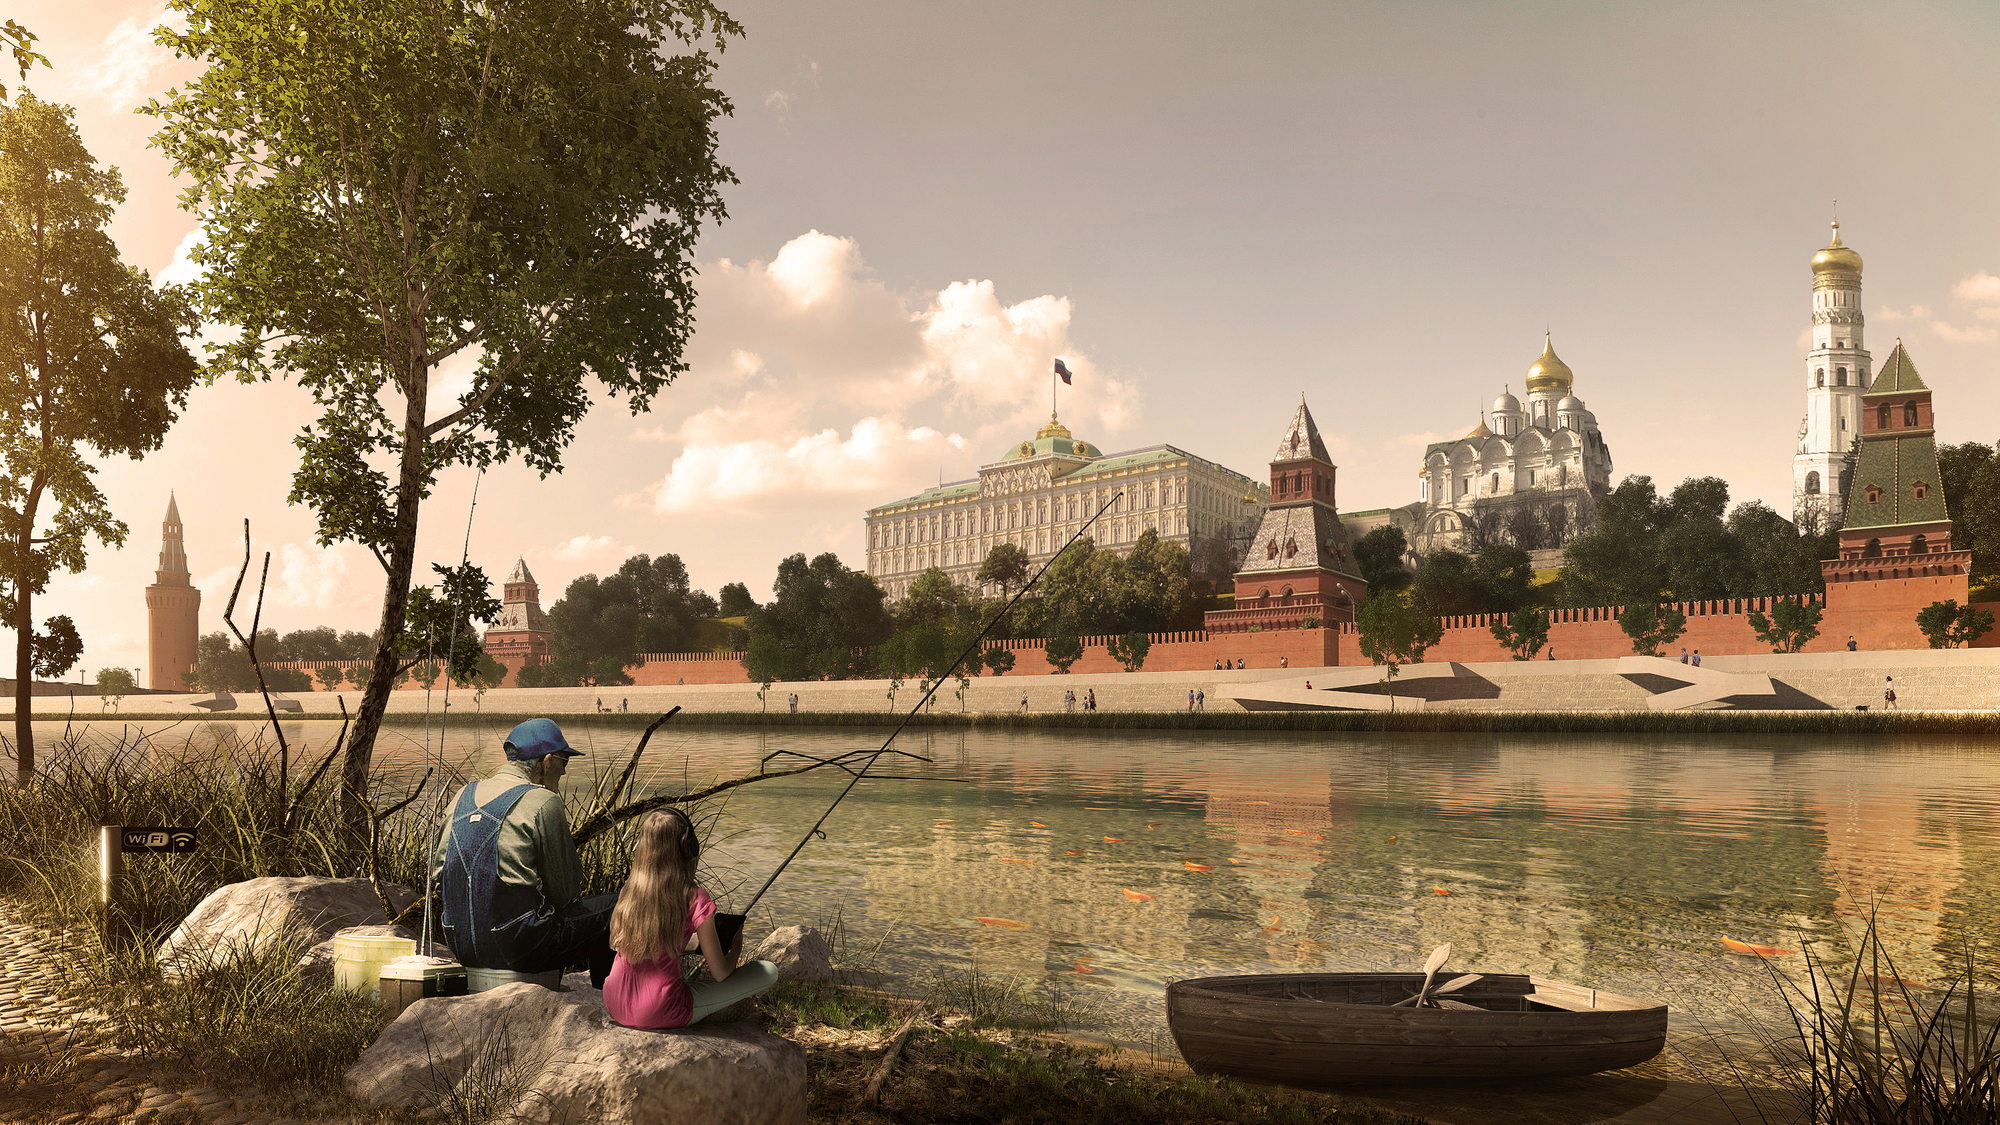 548a36bae58ece0d79000037_project-meganom-wins-contest-to-transform-moscow-riverfront_6-fishing_on_kremlin